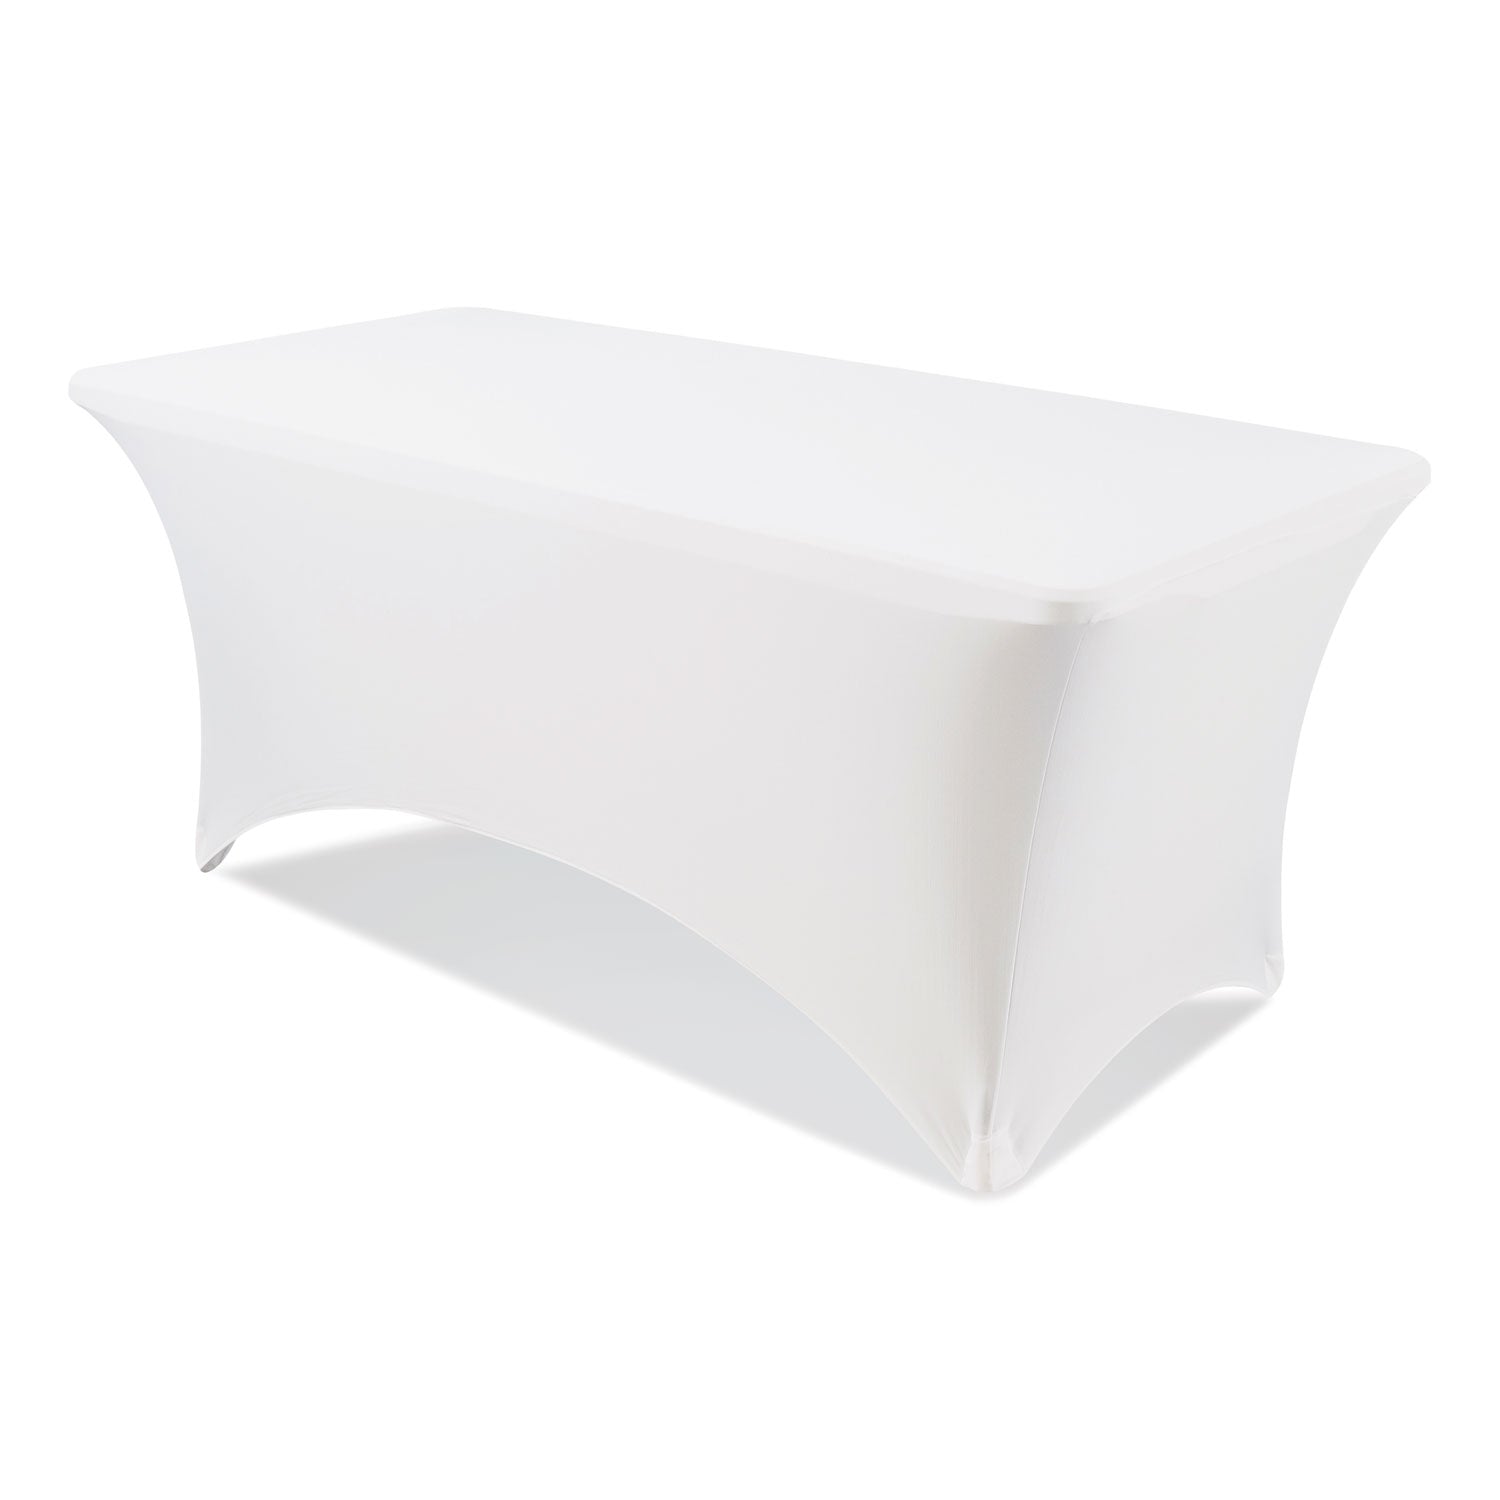 igear-fabric-table-cover-polyester-30-x-96-white_ice16533 - 4